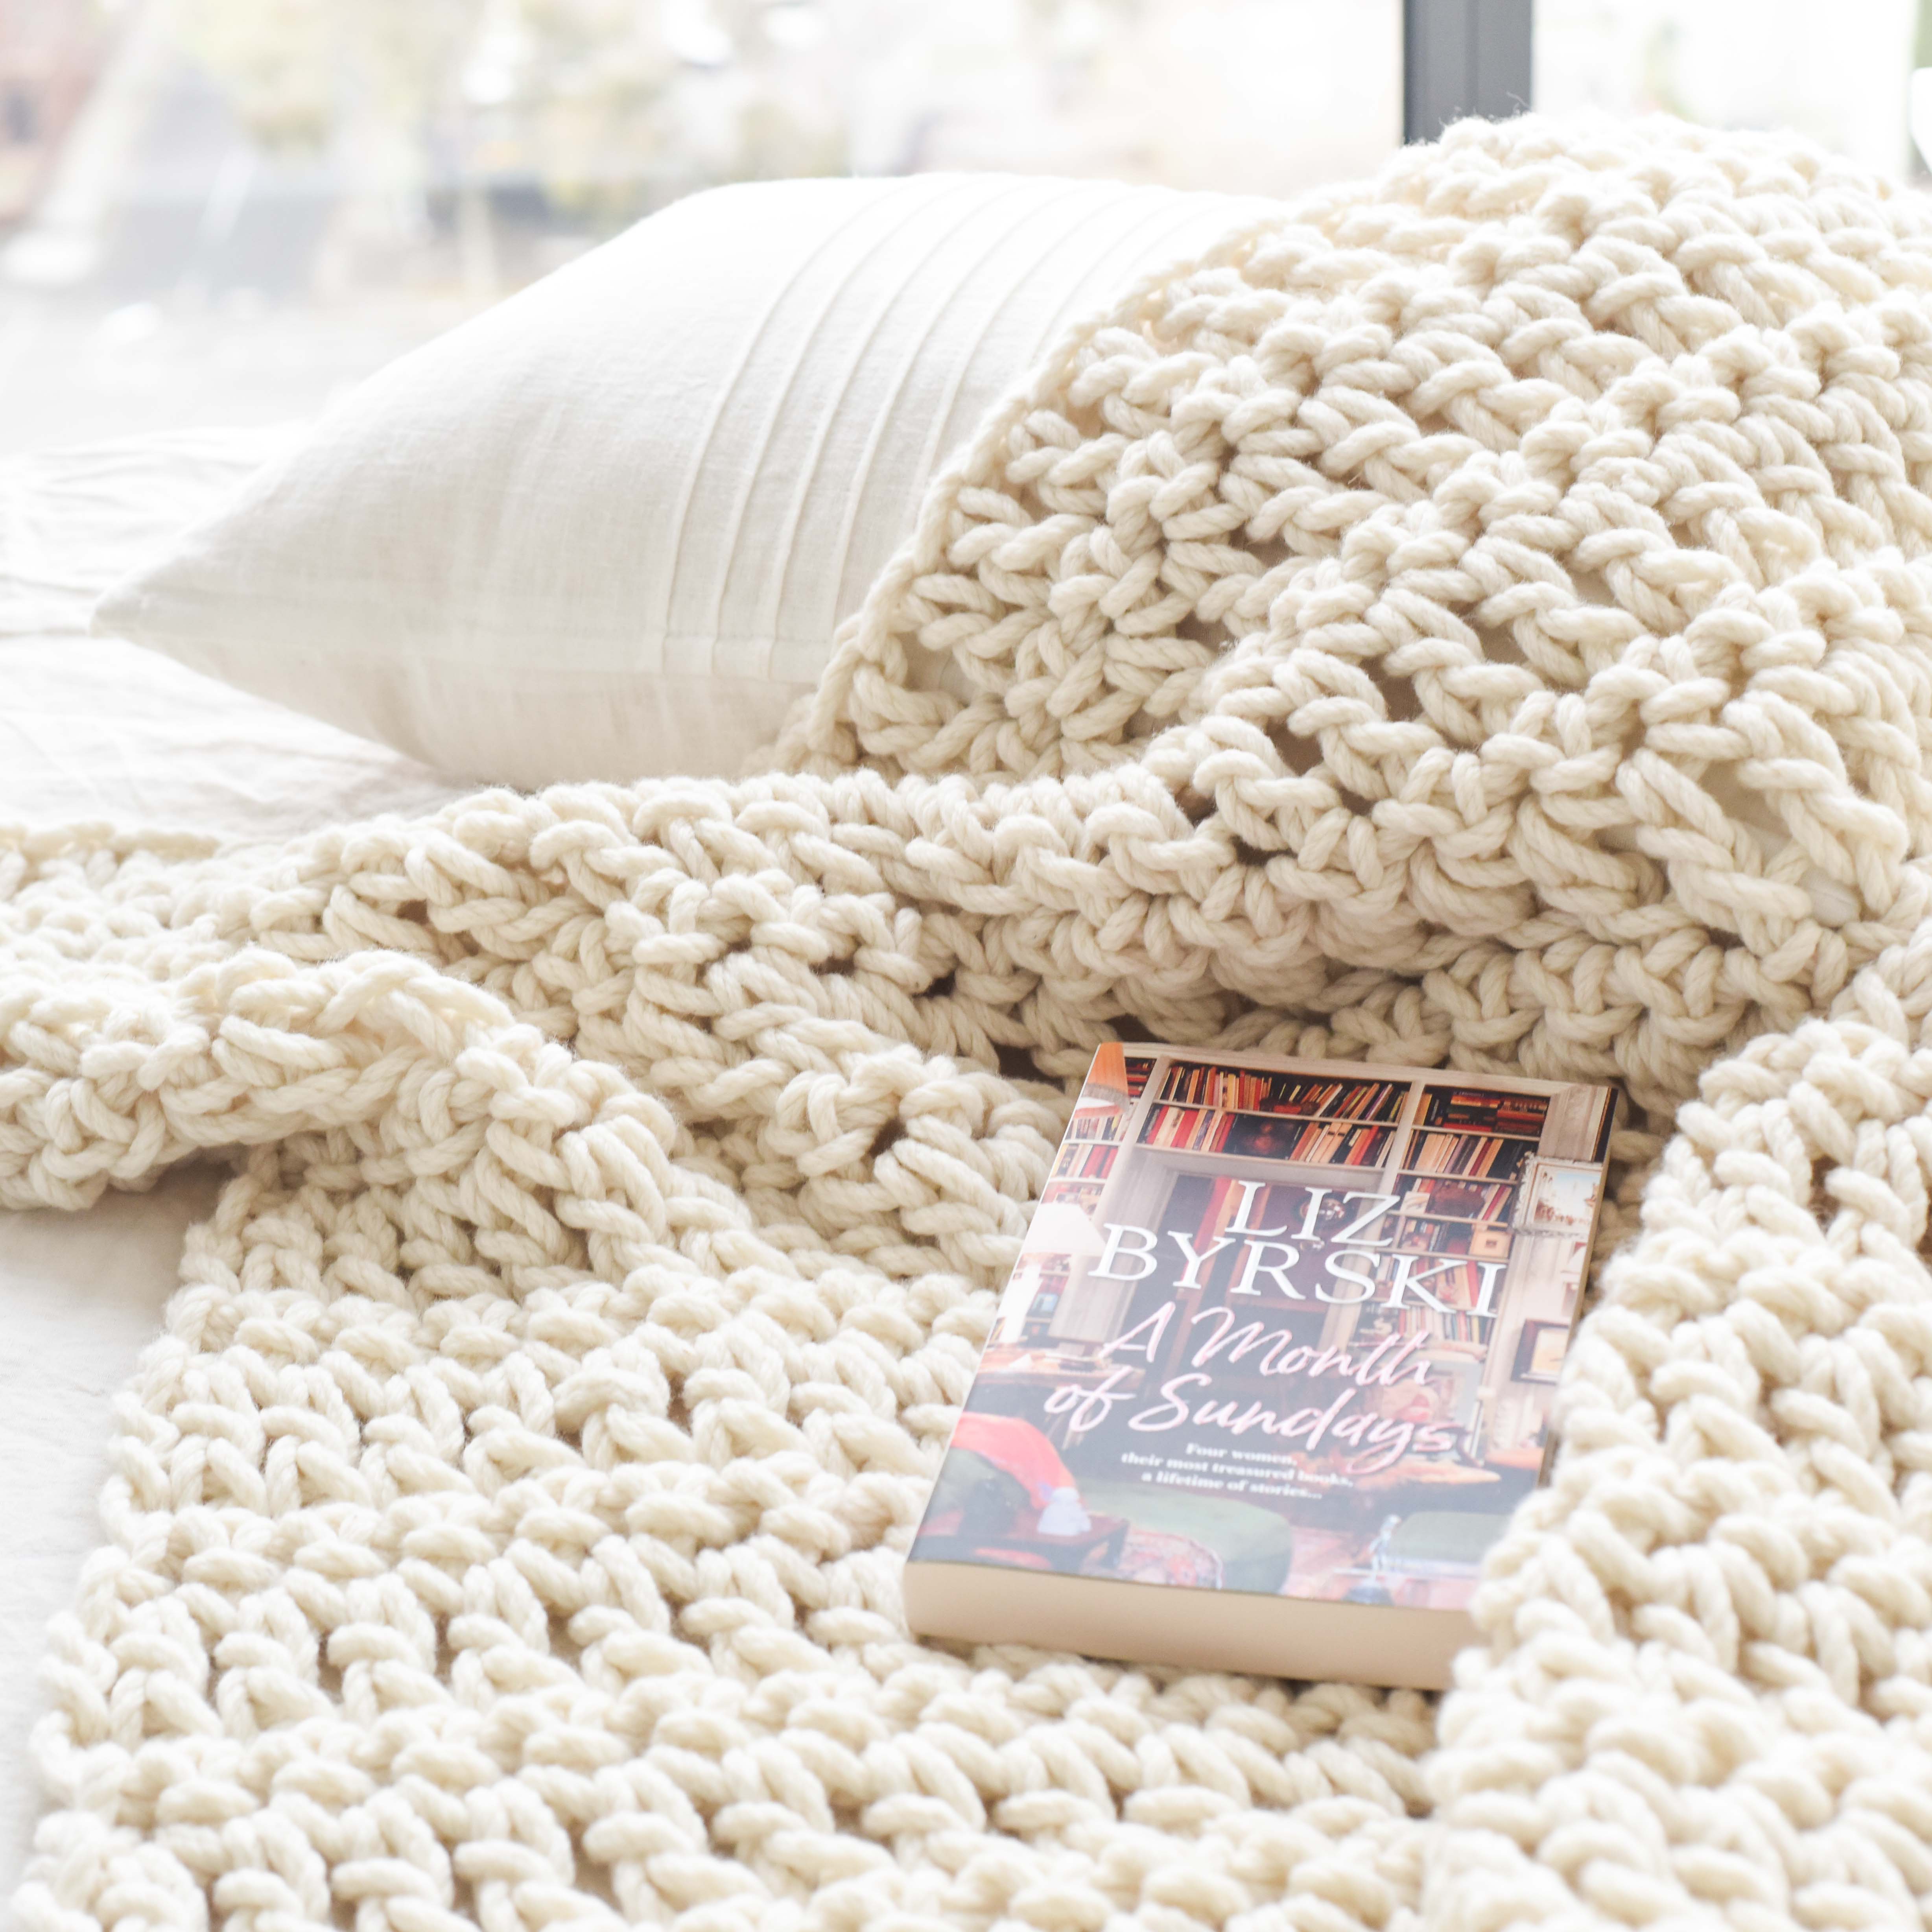 How To Make A Chunky Blanket (even when you can't crochet or knit) | Homelea Lass How To Fix A Crochet Blanket That Is Too Big